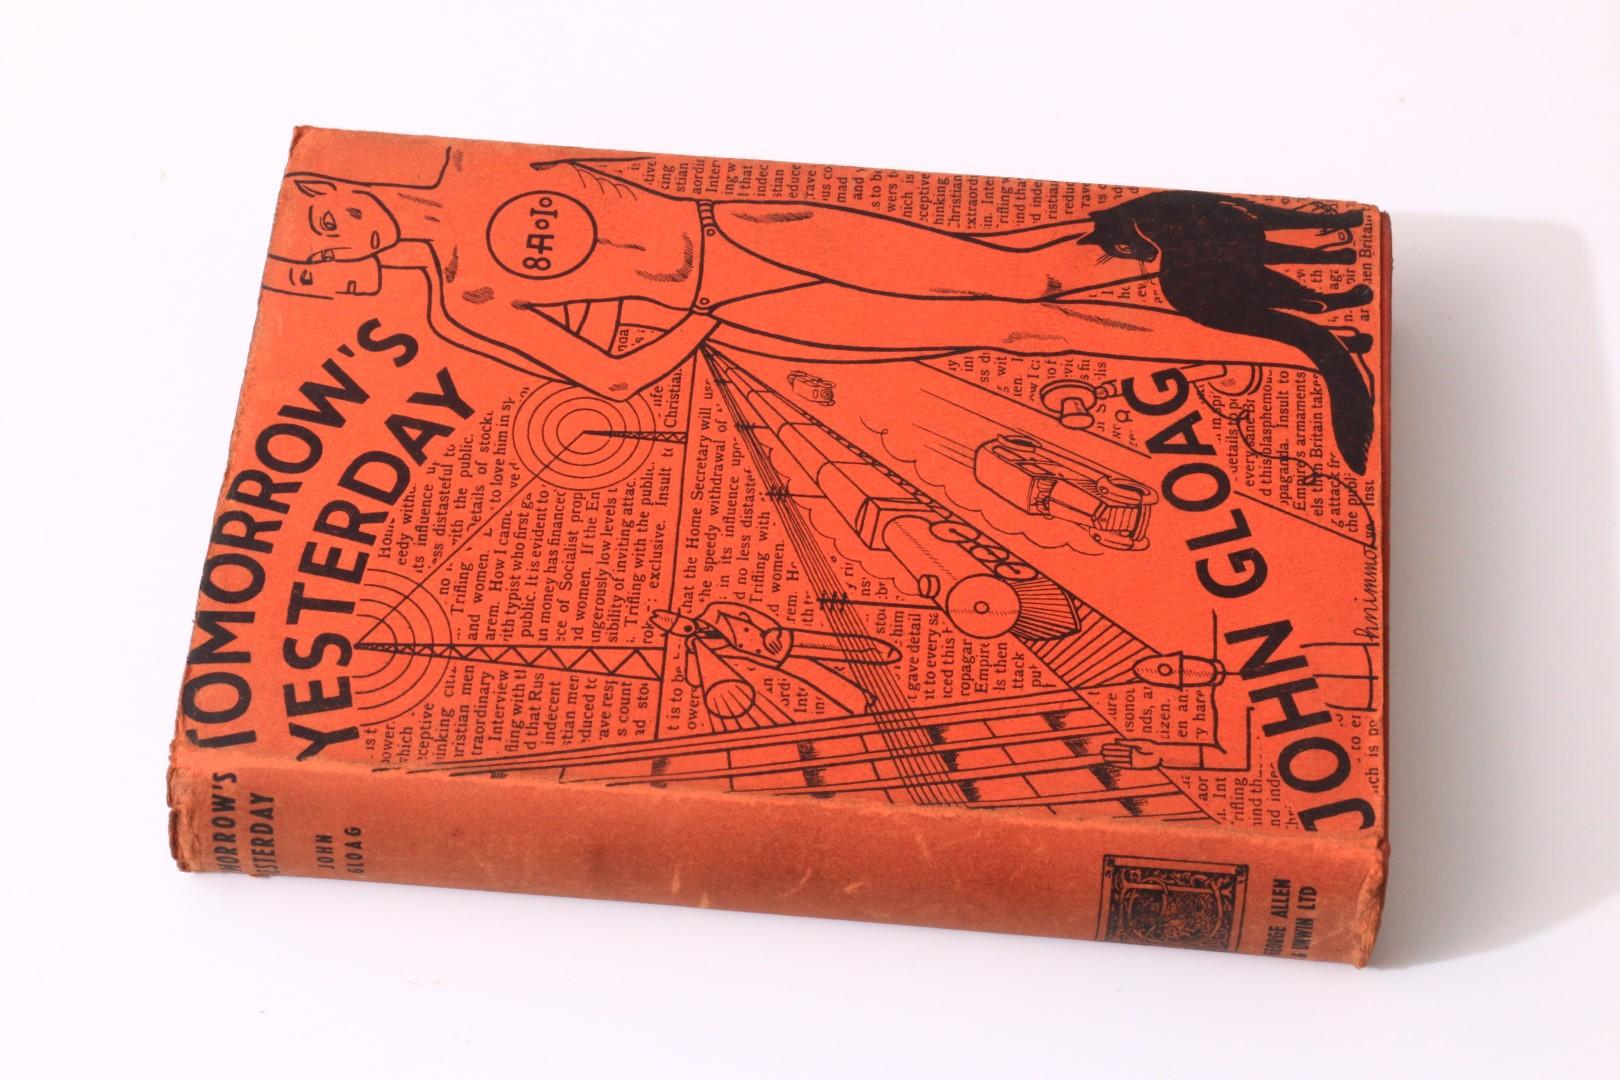 John Gloag - Tomorrow's Yesterday - George Allen & Unwin, 1932, Signed First Edition.